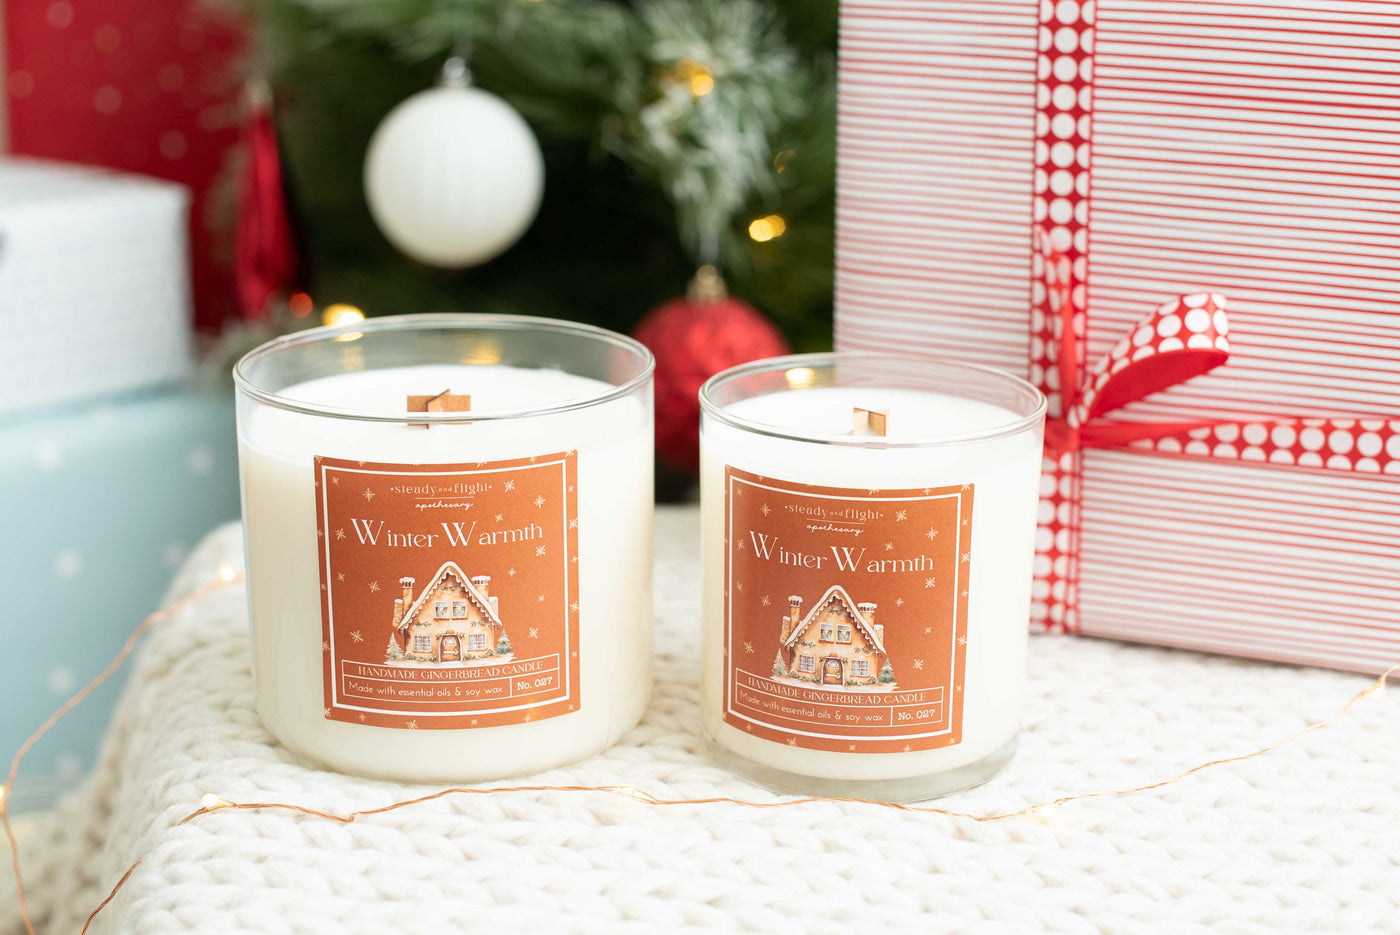 Winter Warmth Gingerbread Candle